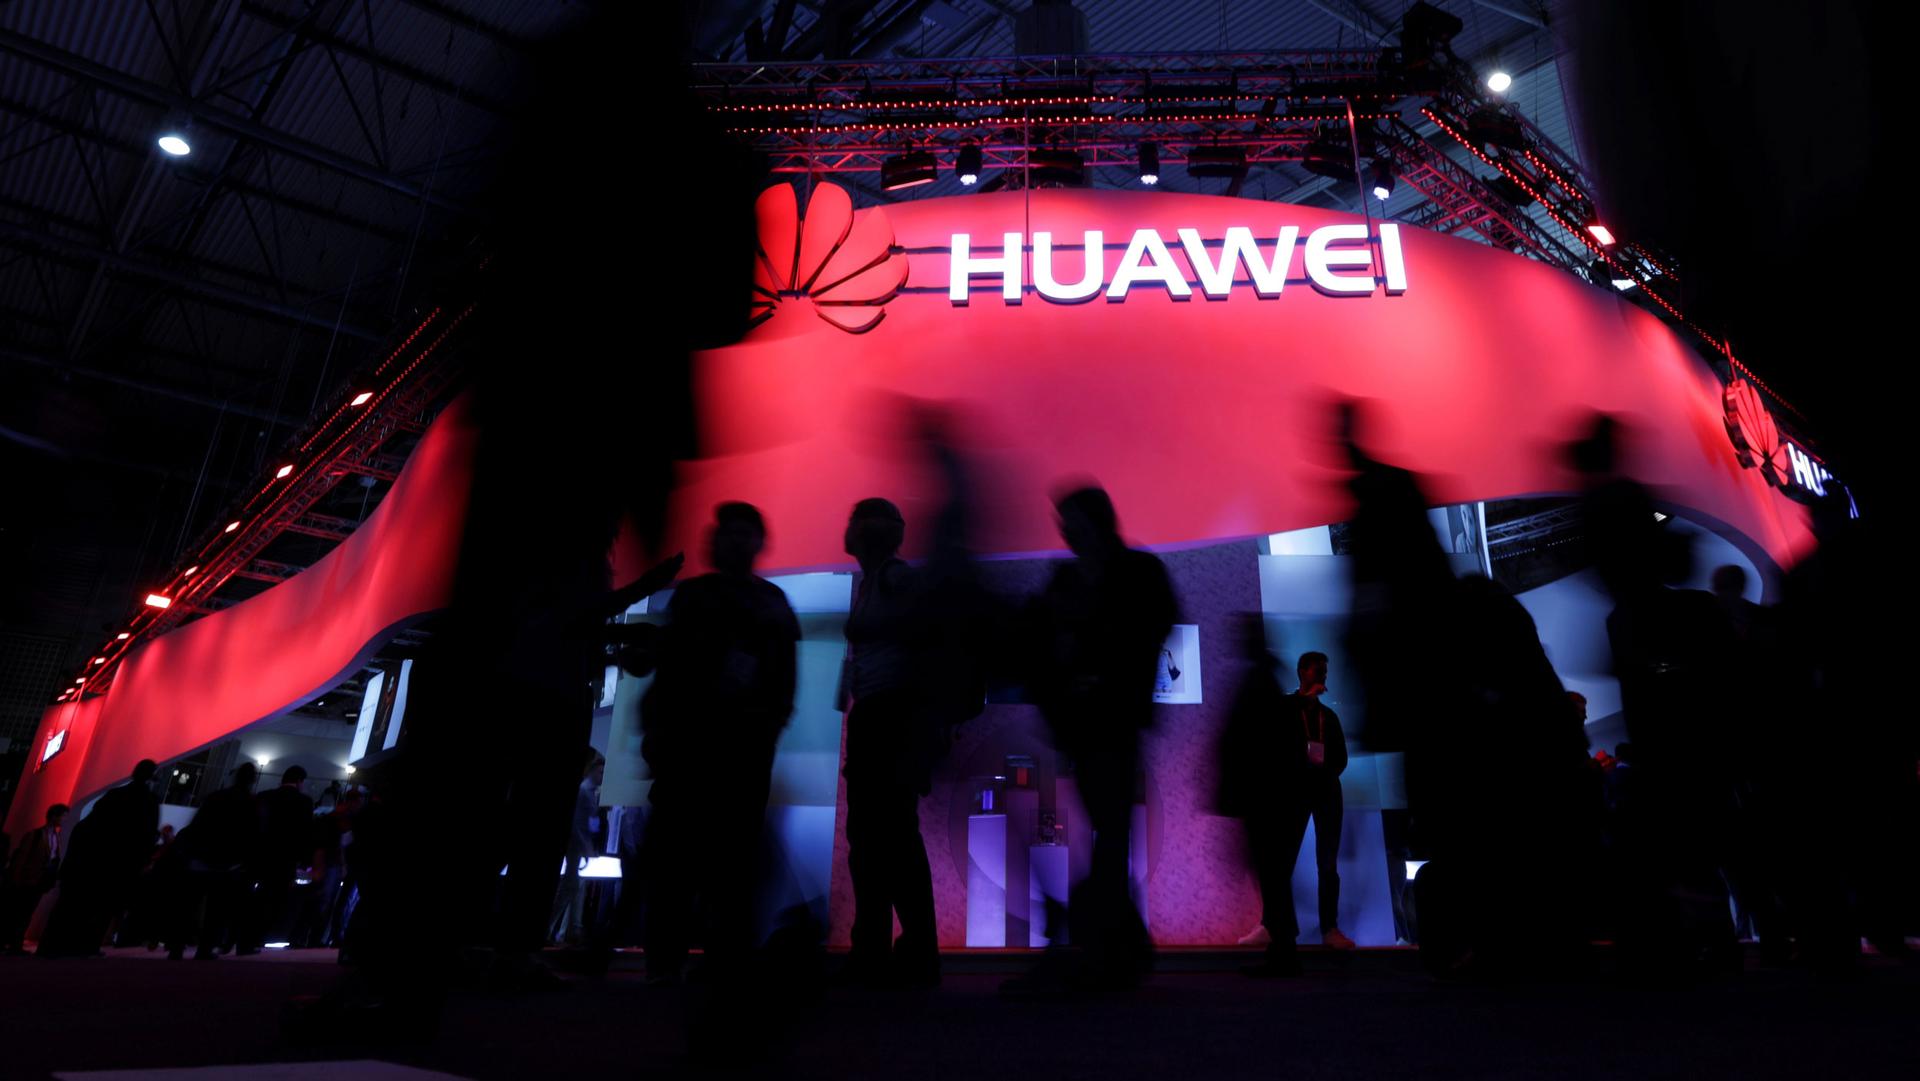 Several people in shadow are shown walking by a red illuminated sign for Huawei.